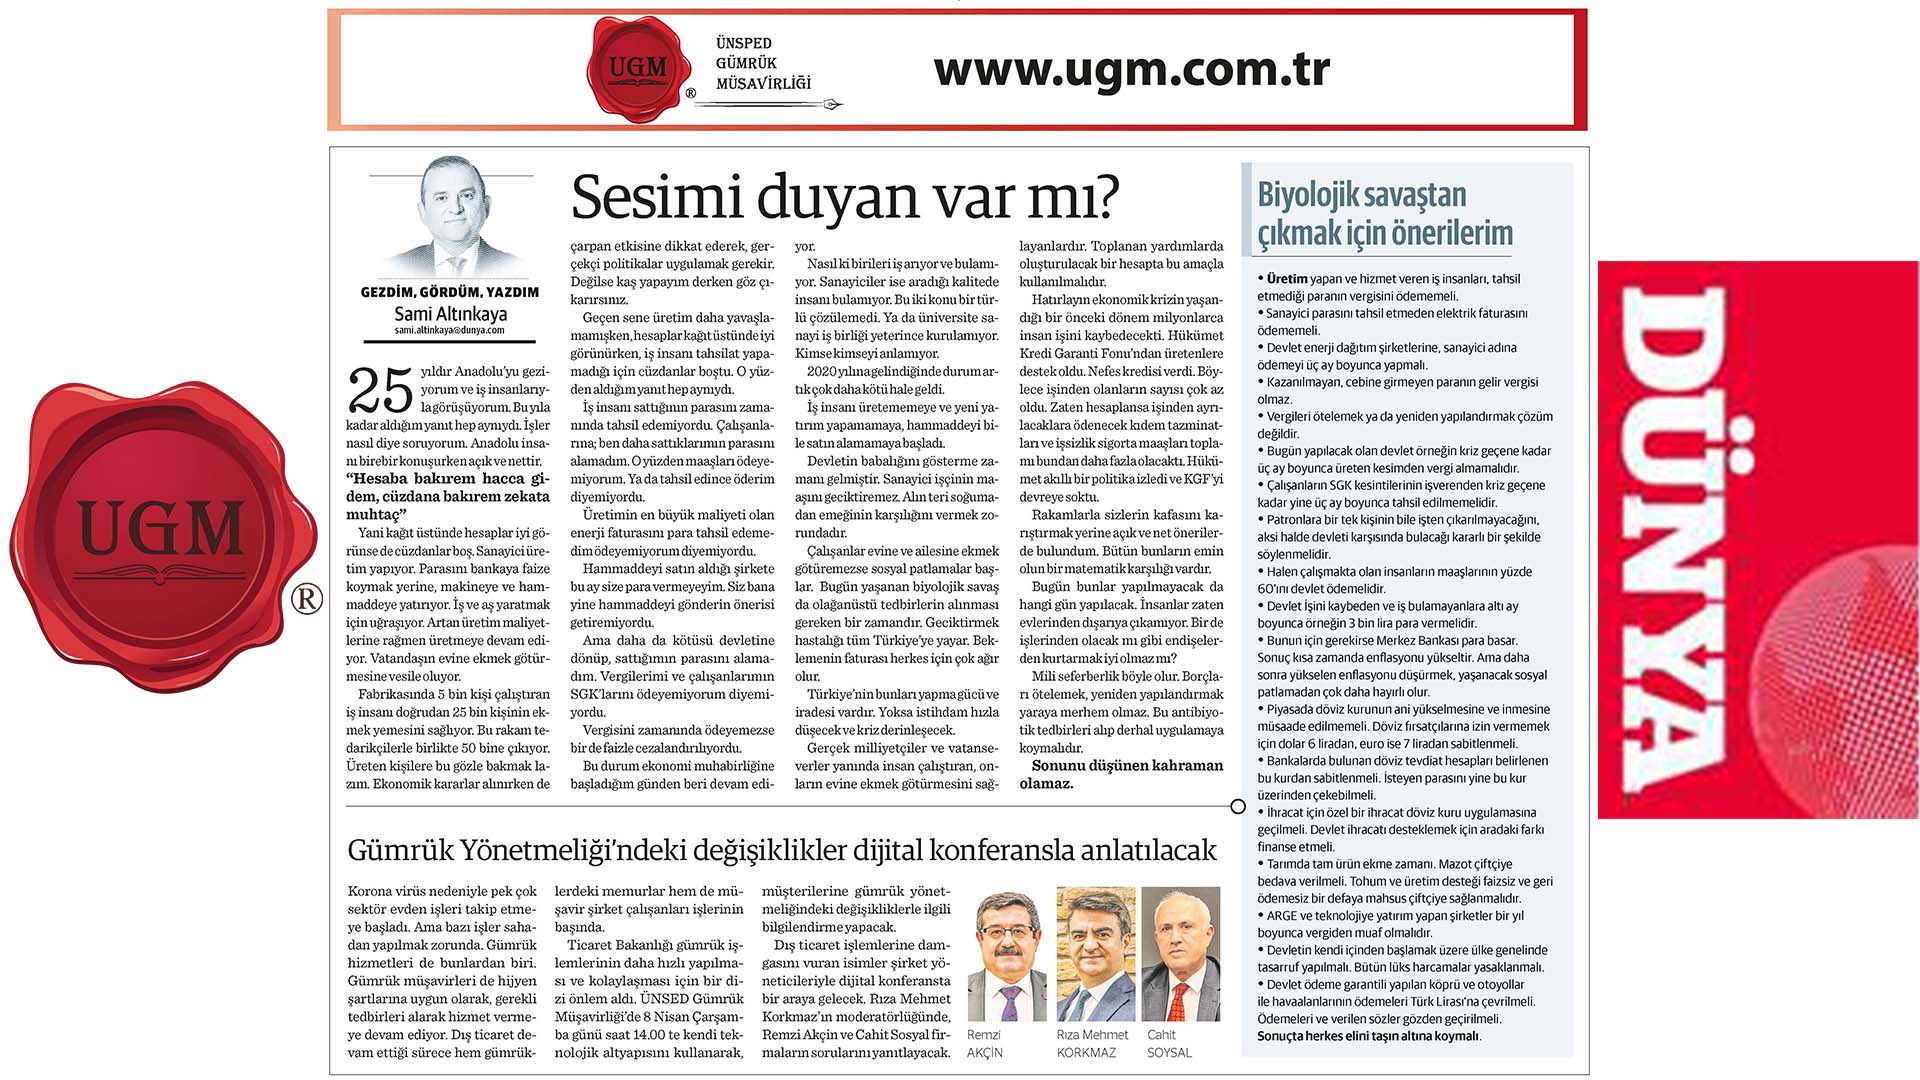 Our UGM Corporate Communications Director Mr. Sami Altınkaya's article titled "Does anyone hear my noise?" was published in Dünya Newspaper on 06.04.2020.